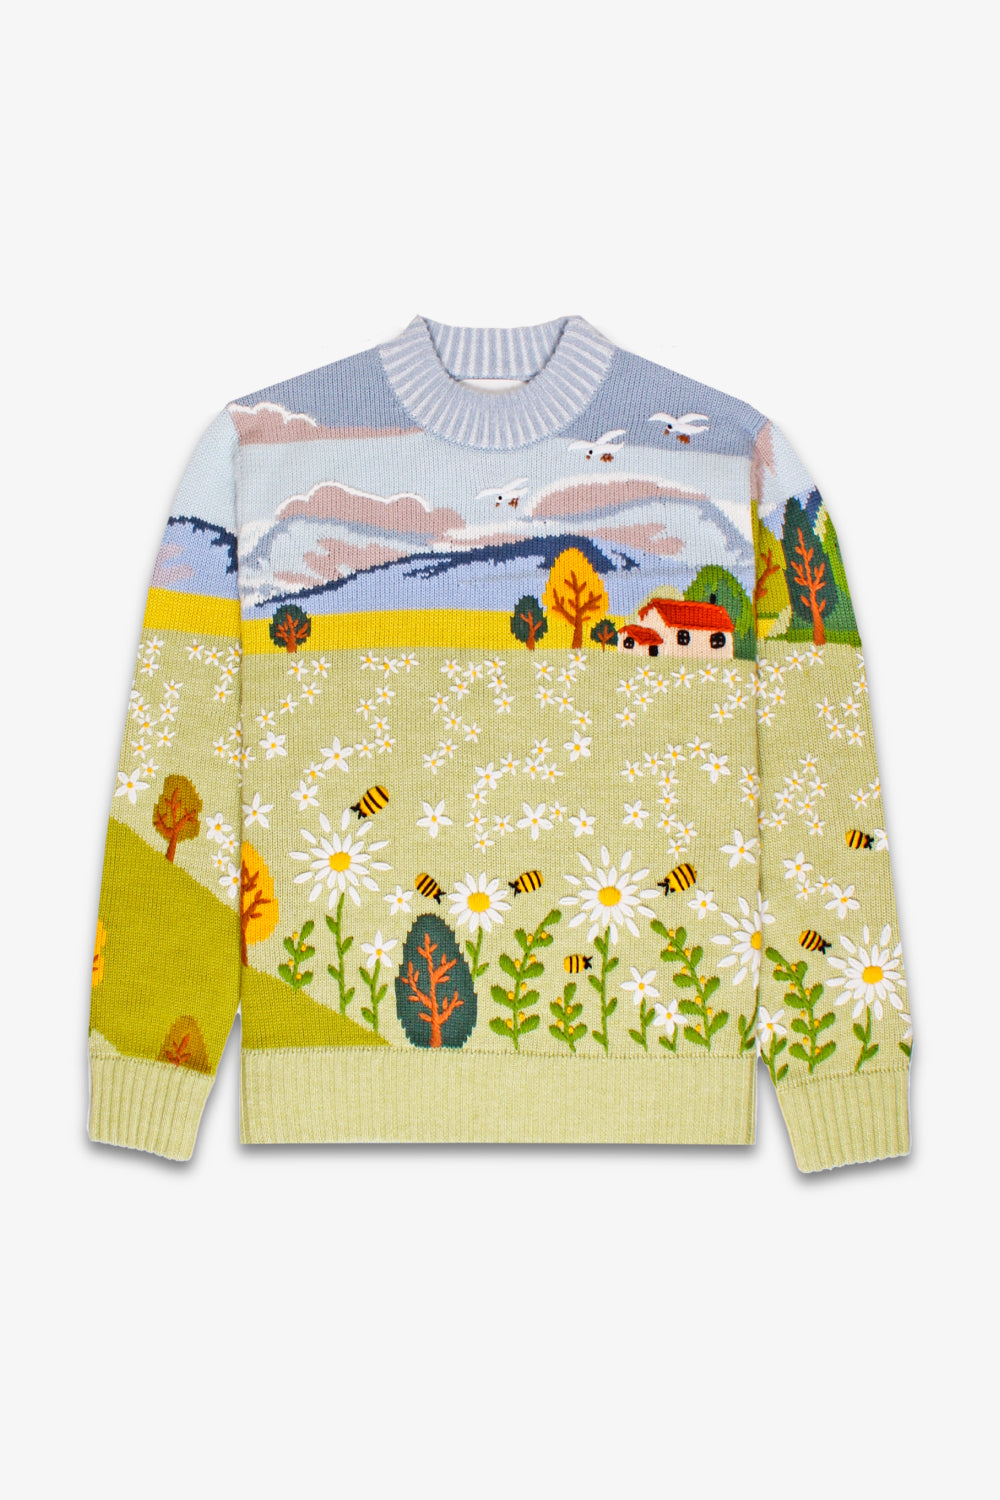 Summer Bloom Hand Embroidery Sweater